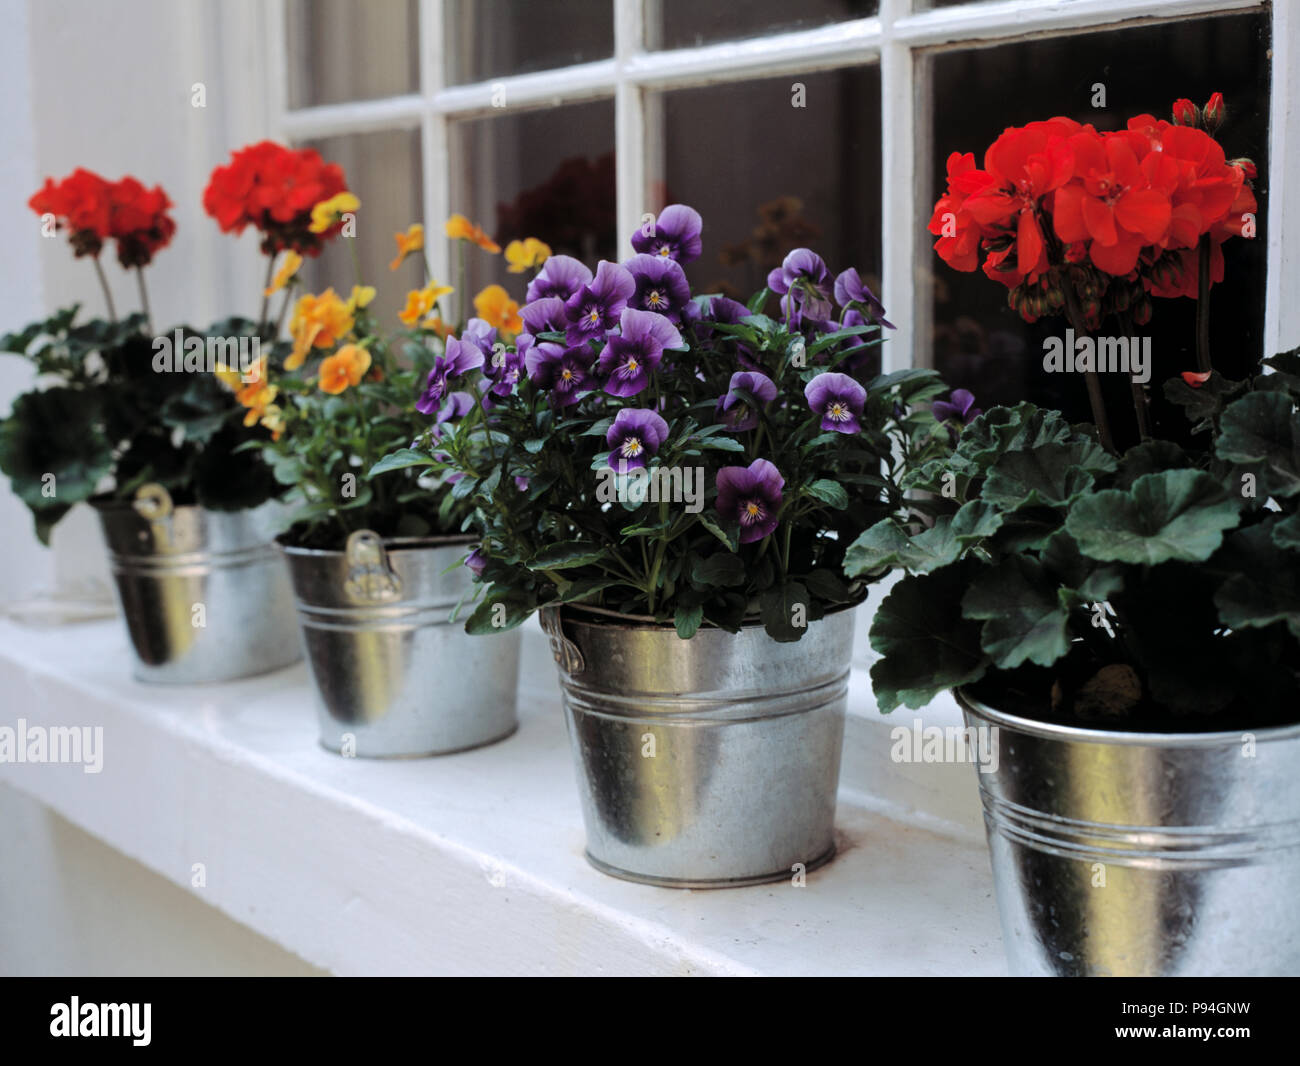 Close-up of red geraniums and yellow and purple pansies in galvanised tin pots on windowsill Stock Photo